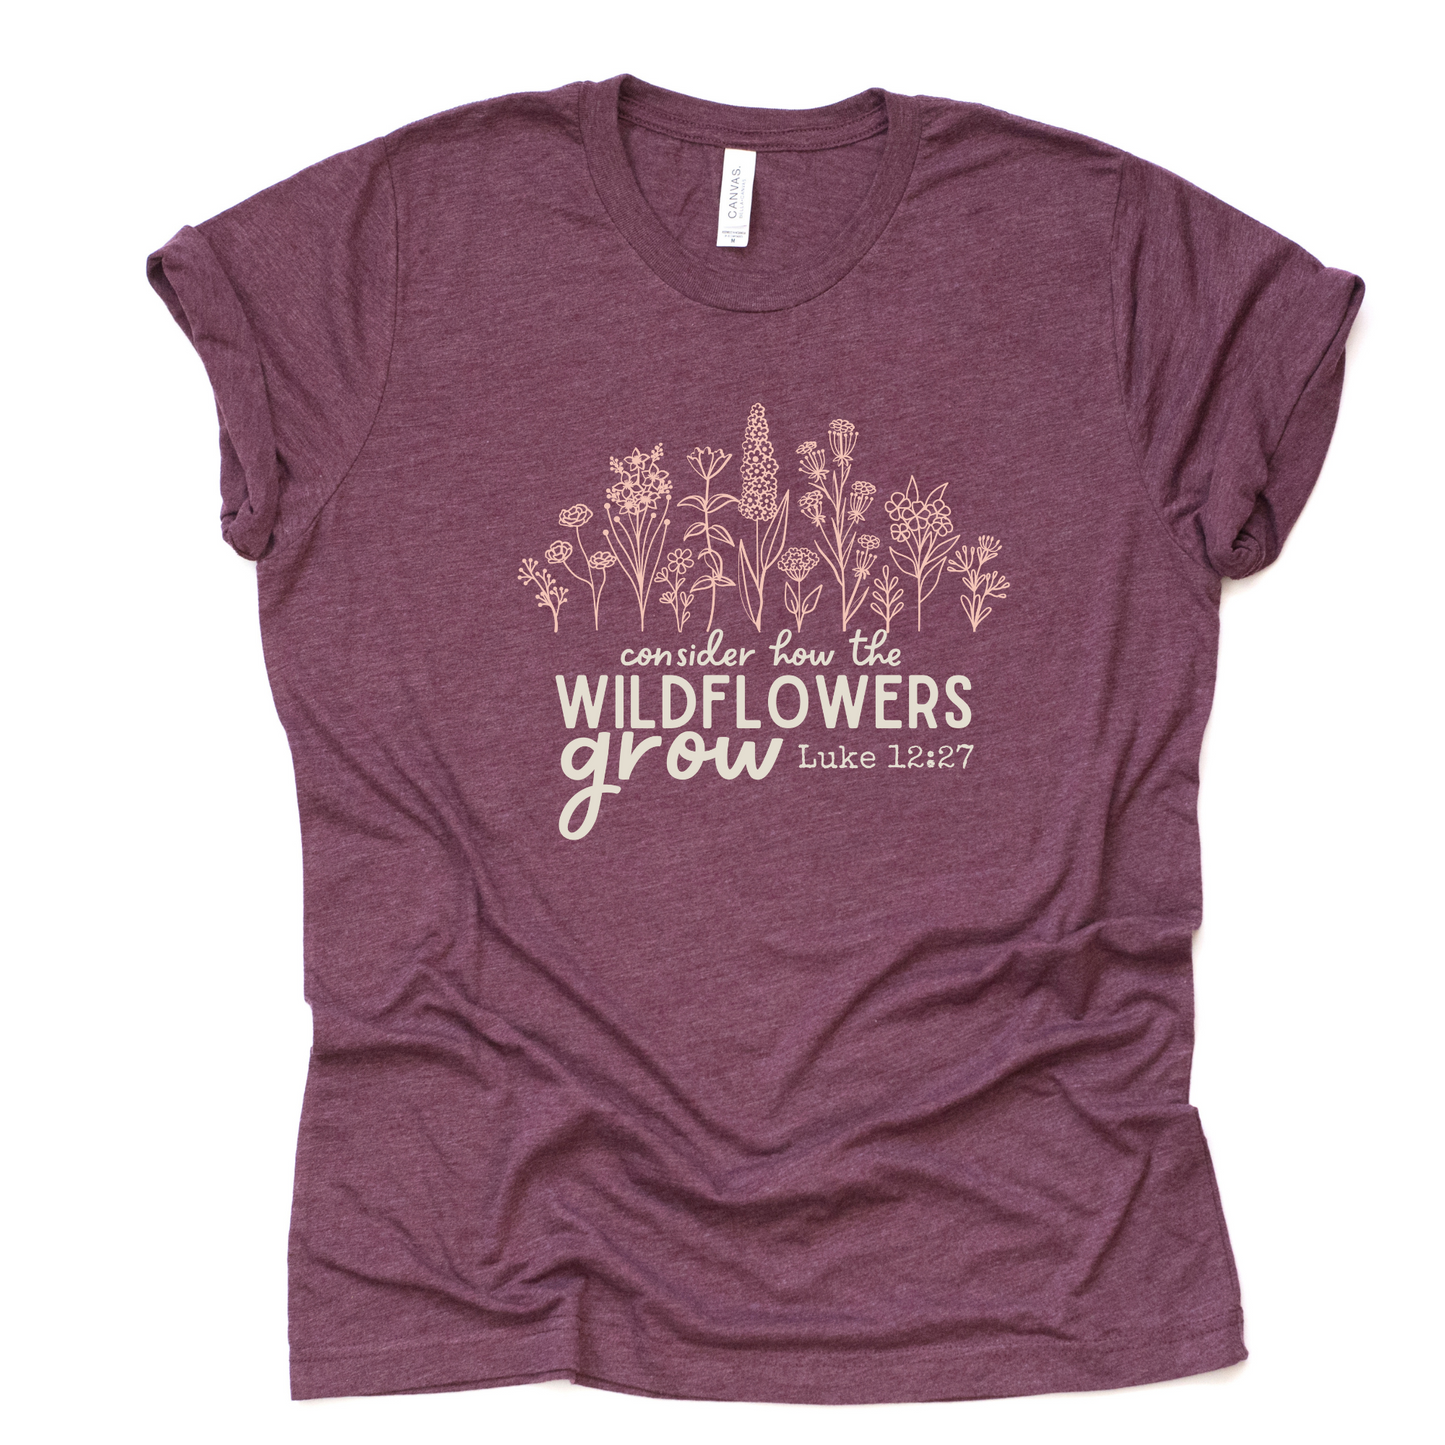 Consider How the Wildflowers Grow Christian T-Shirt in Bella Canvas Heather Maroon